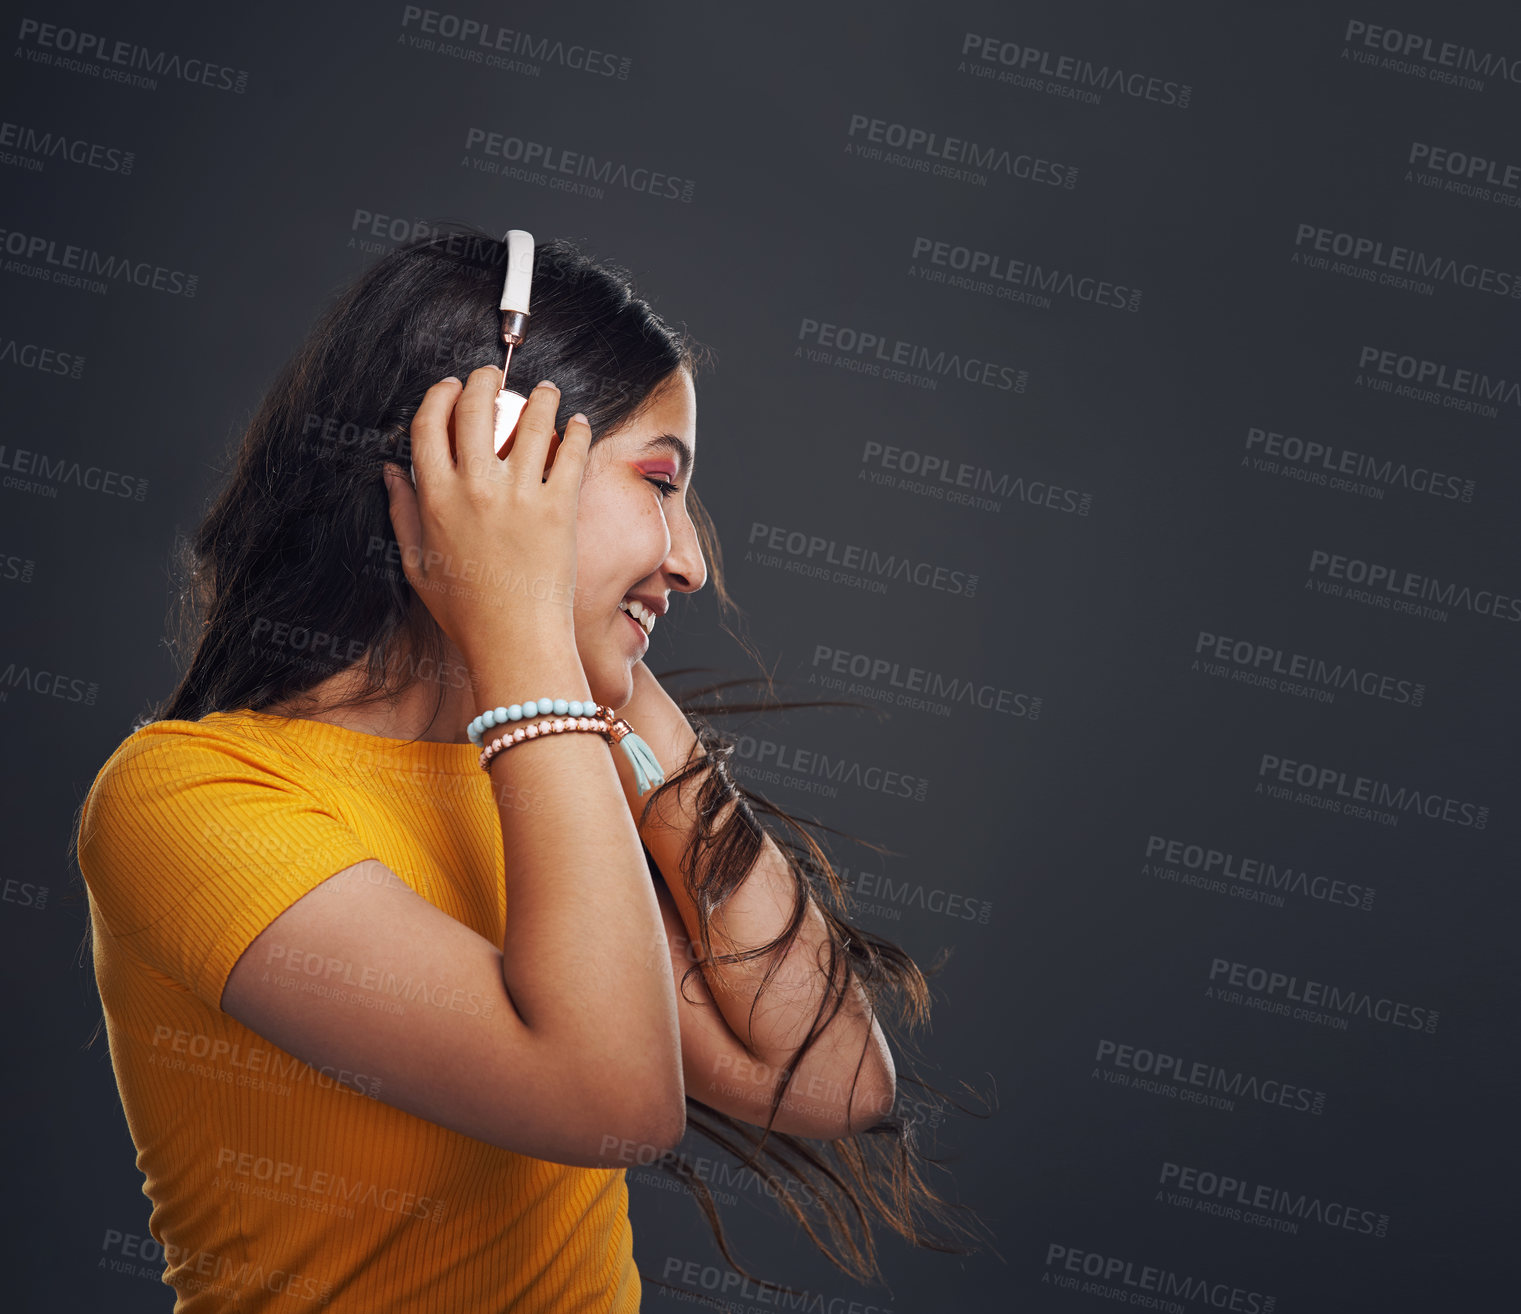 Buy stock photo Cropped shot of an attractive teenage girl standing against a dark background alone and listening to music through headphones